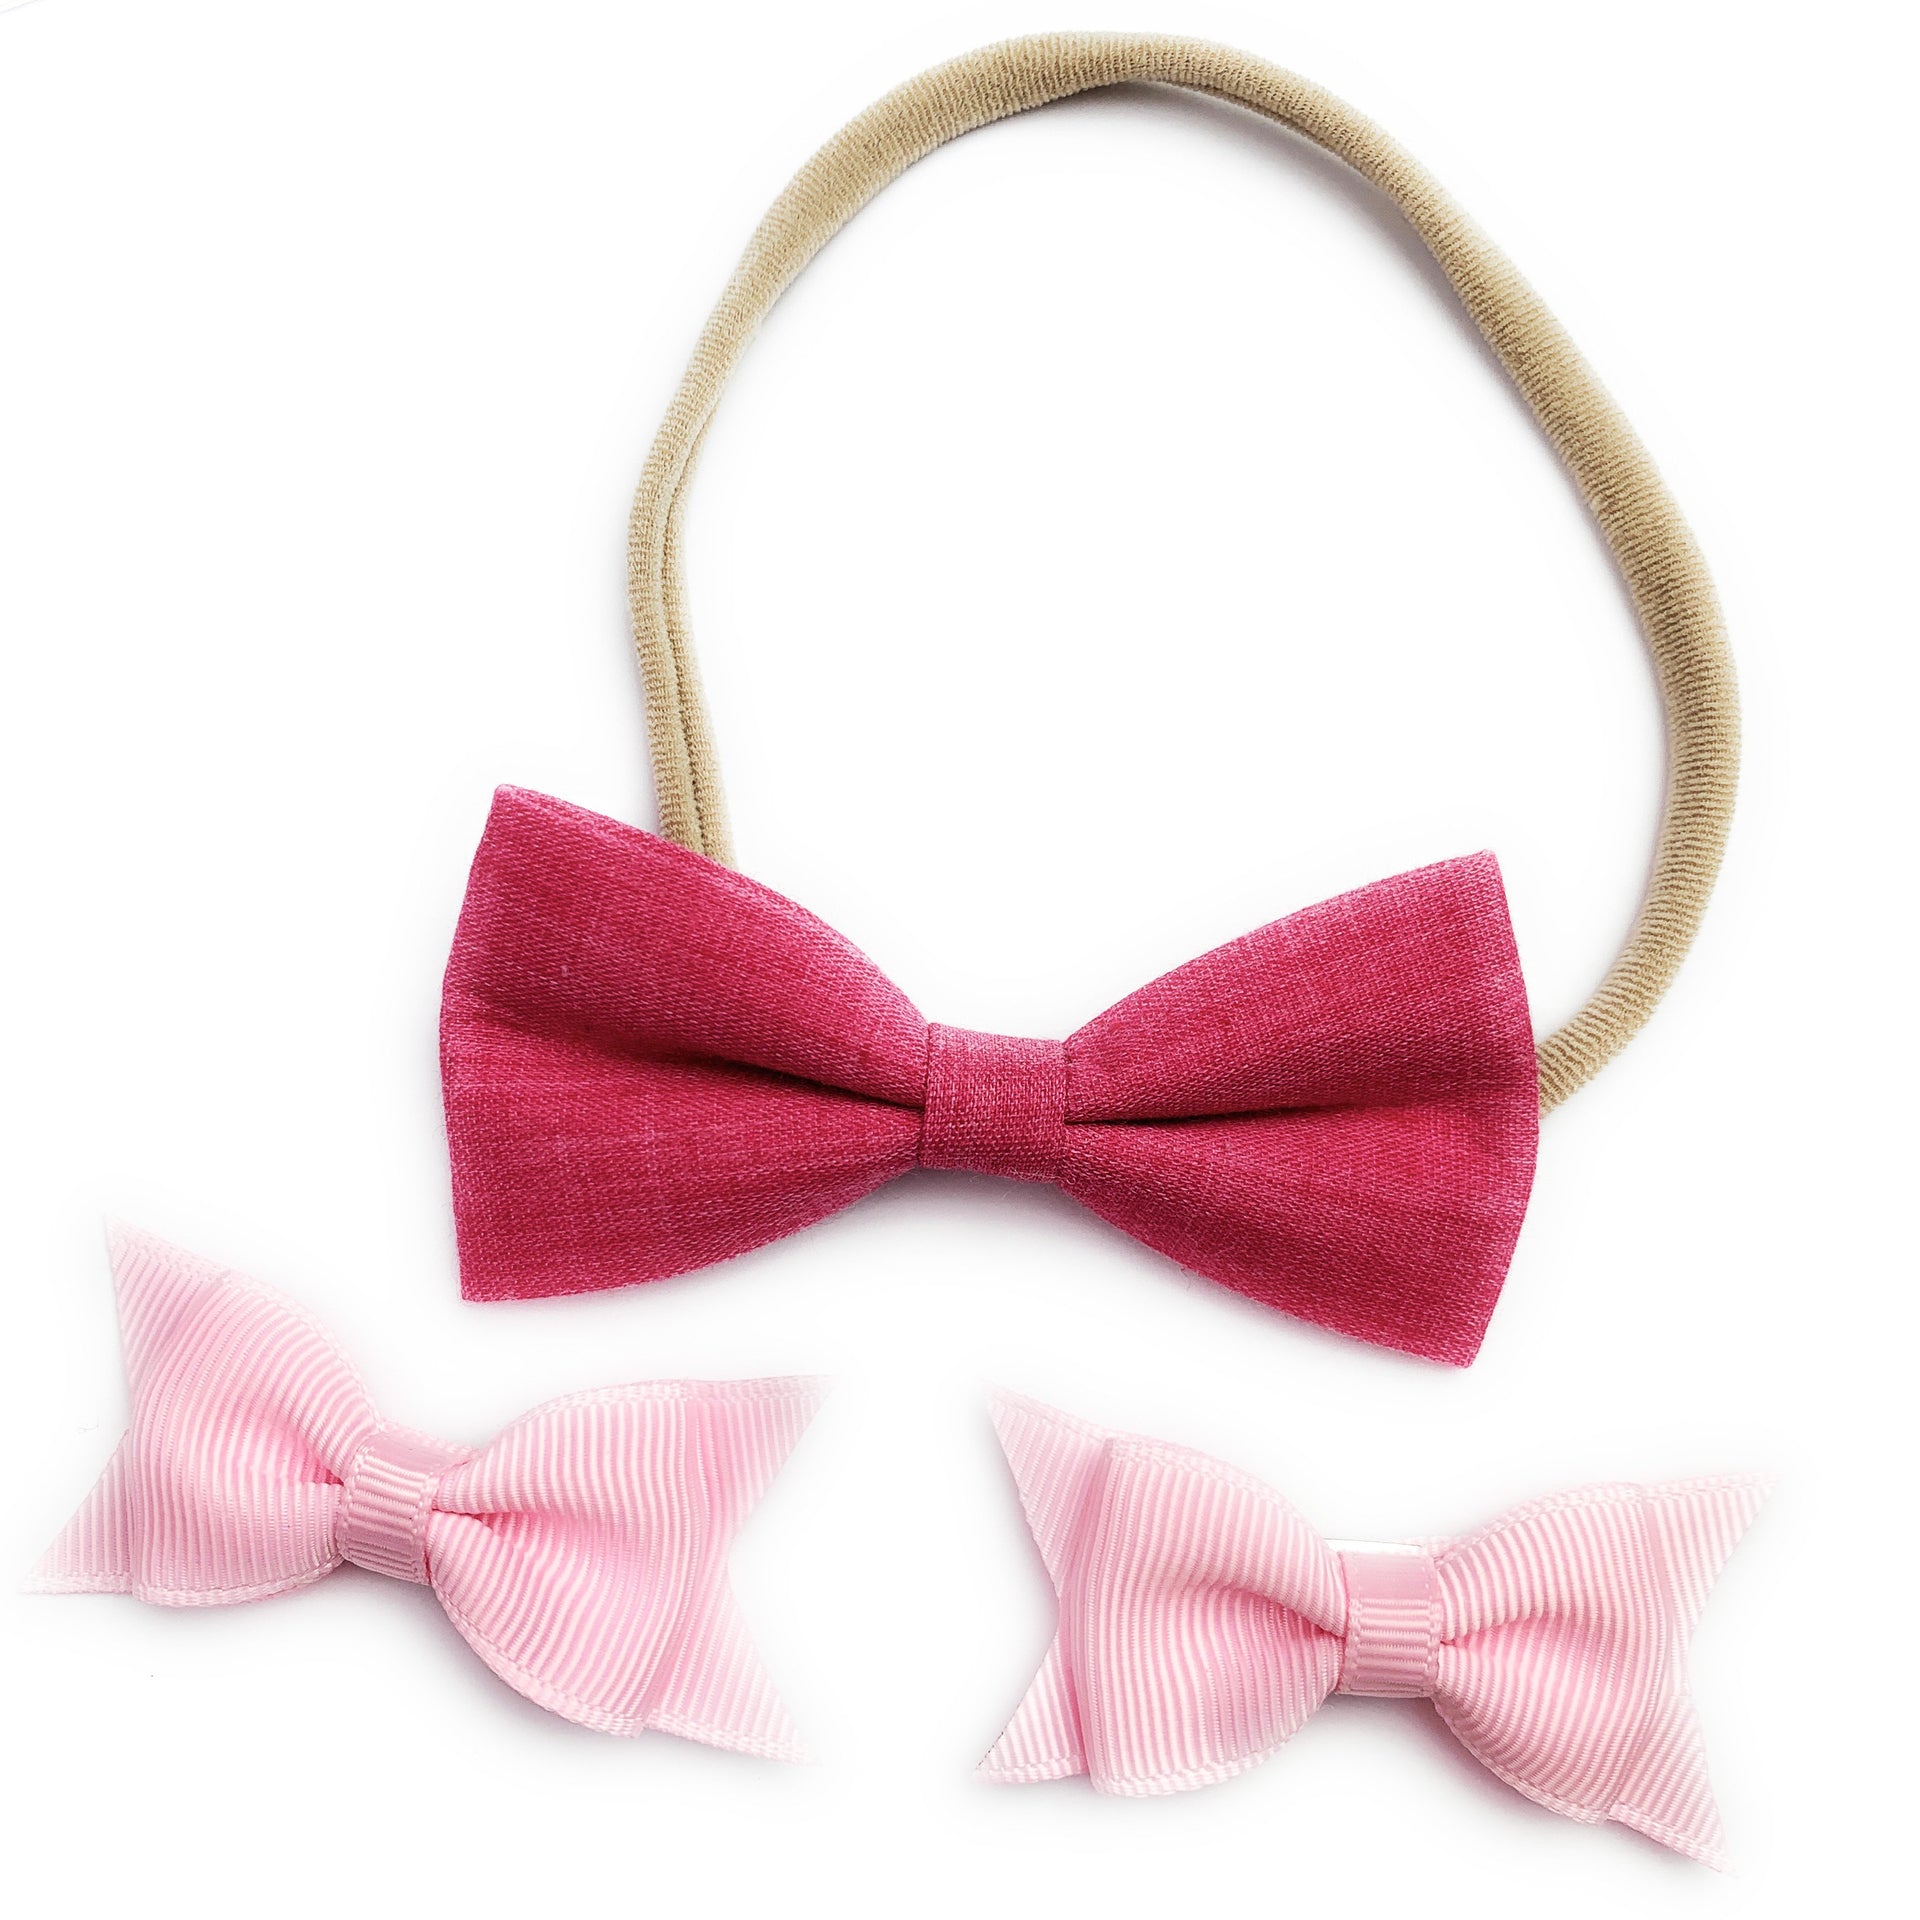 Free Gift:  Valentine's Hugs Set of Bows